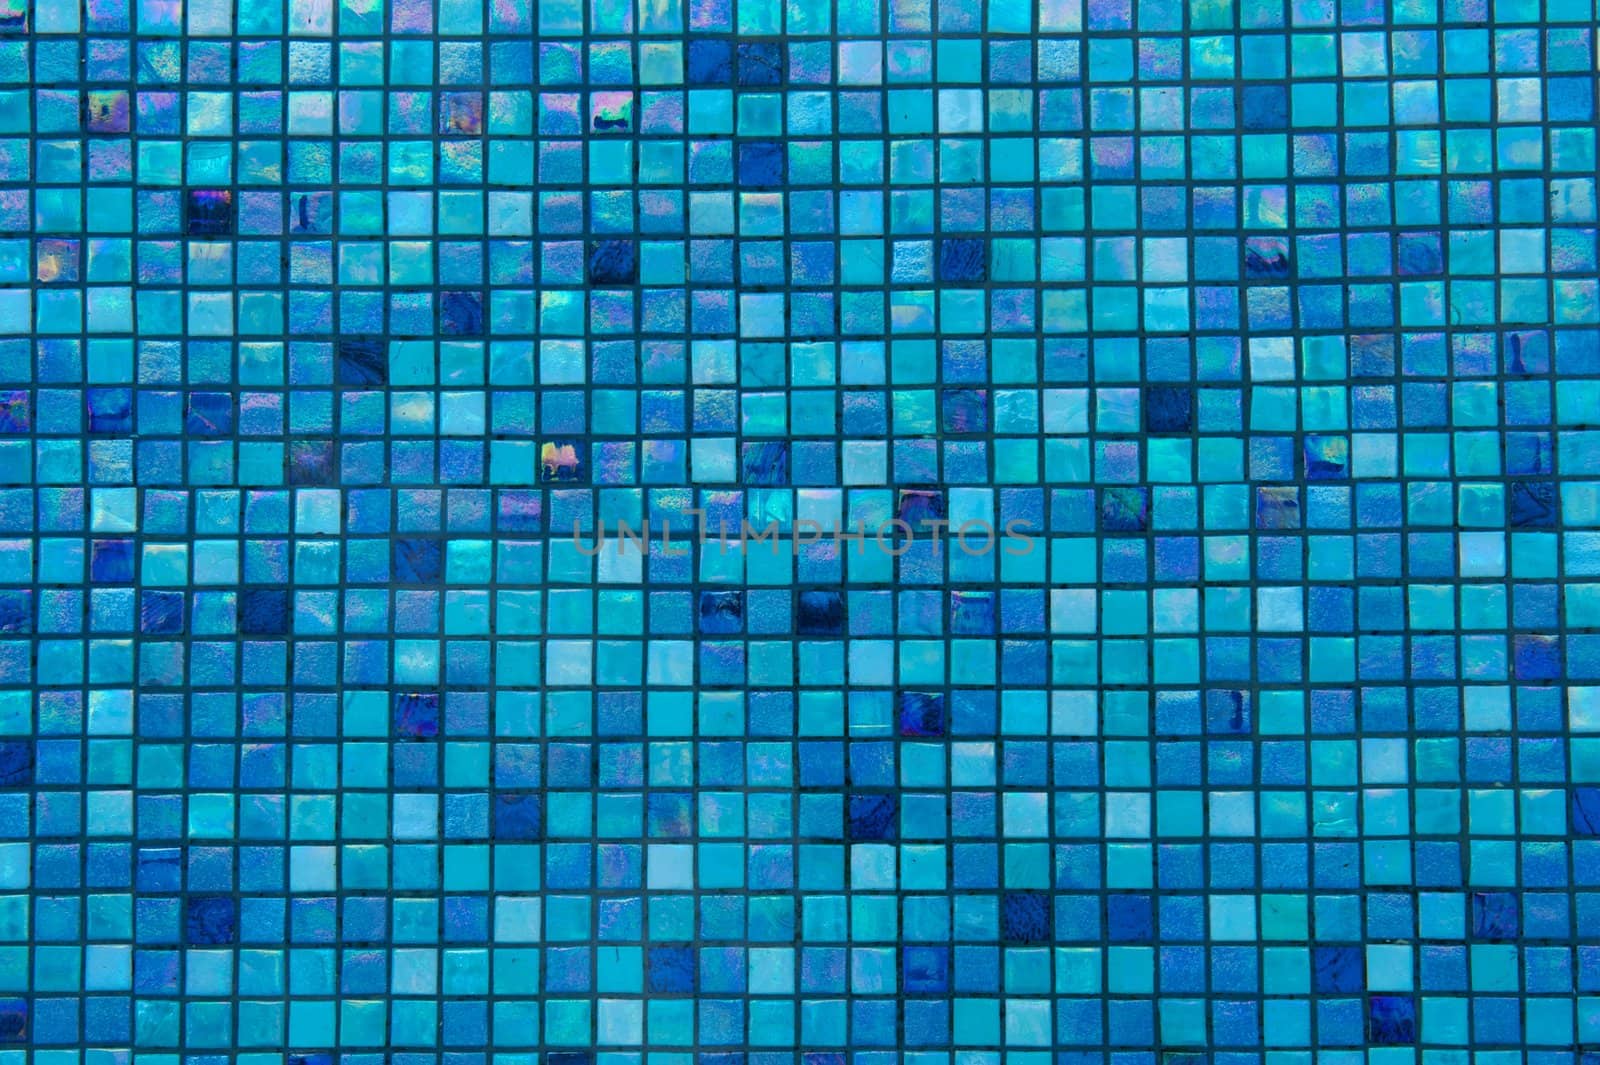 Bright blue glass tiles lining the bottom of a swimming pool